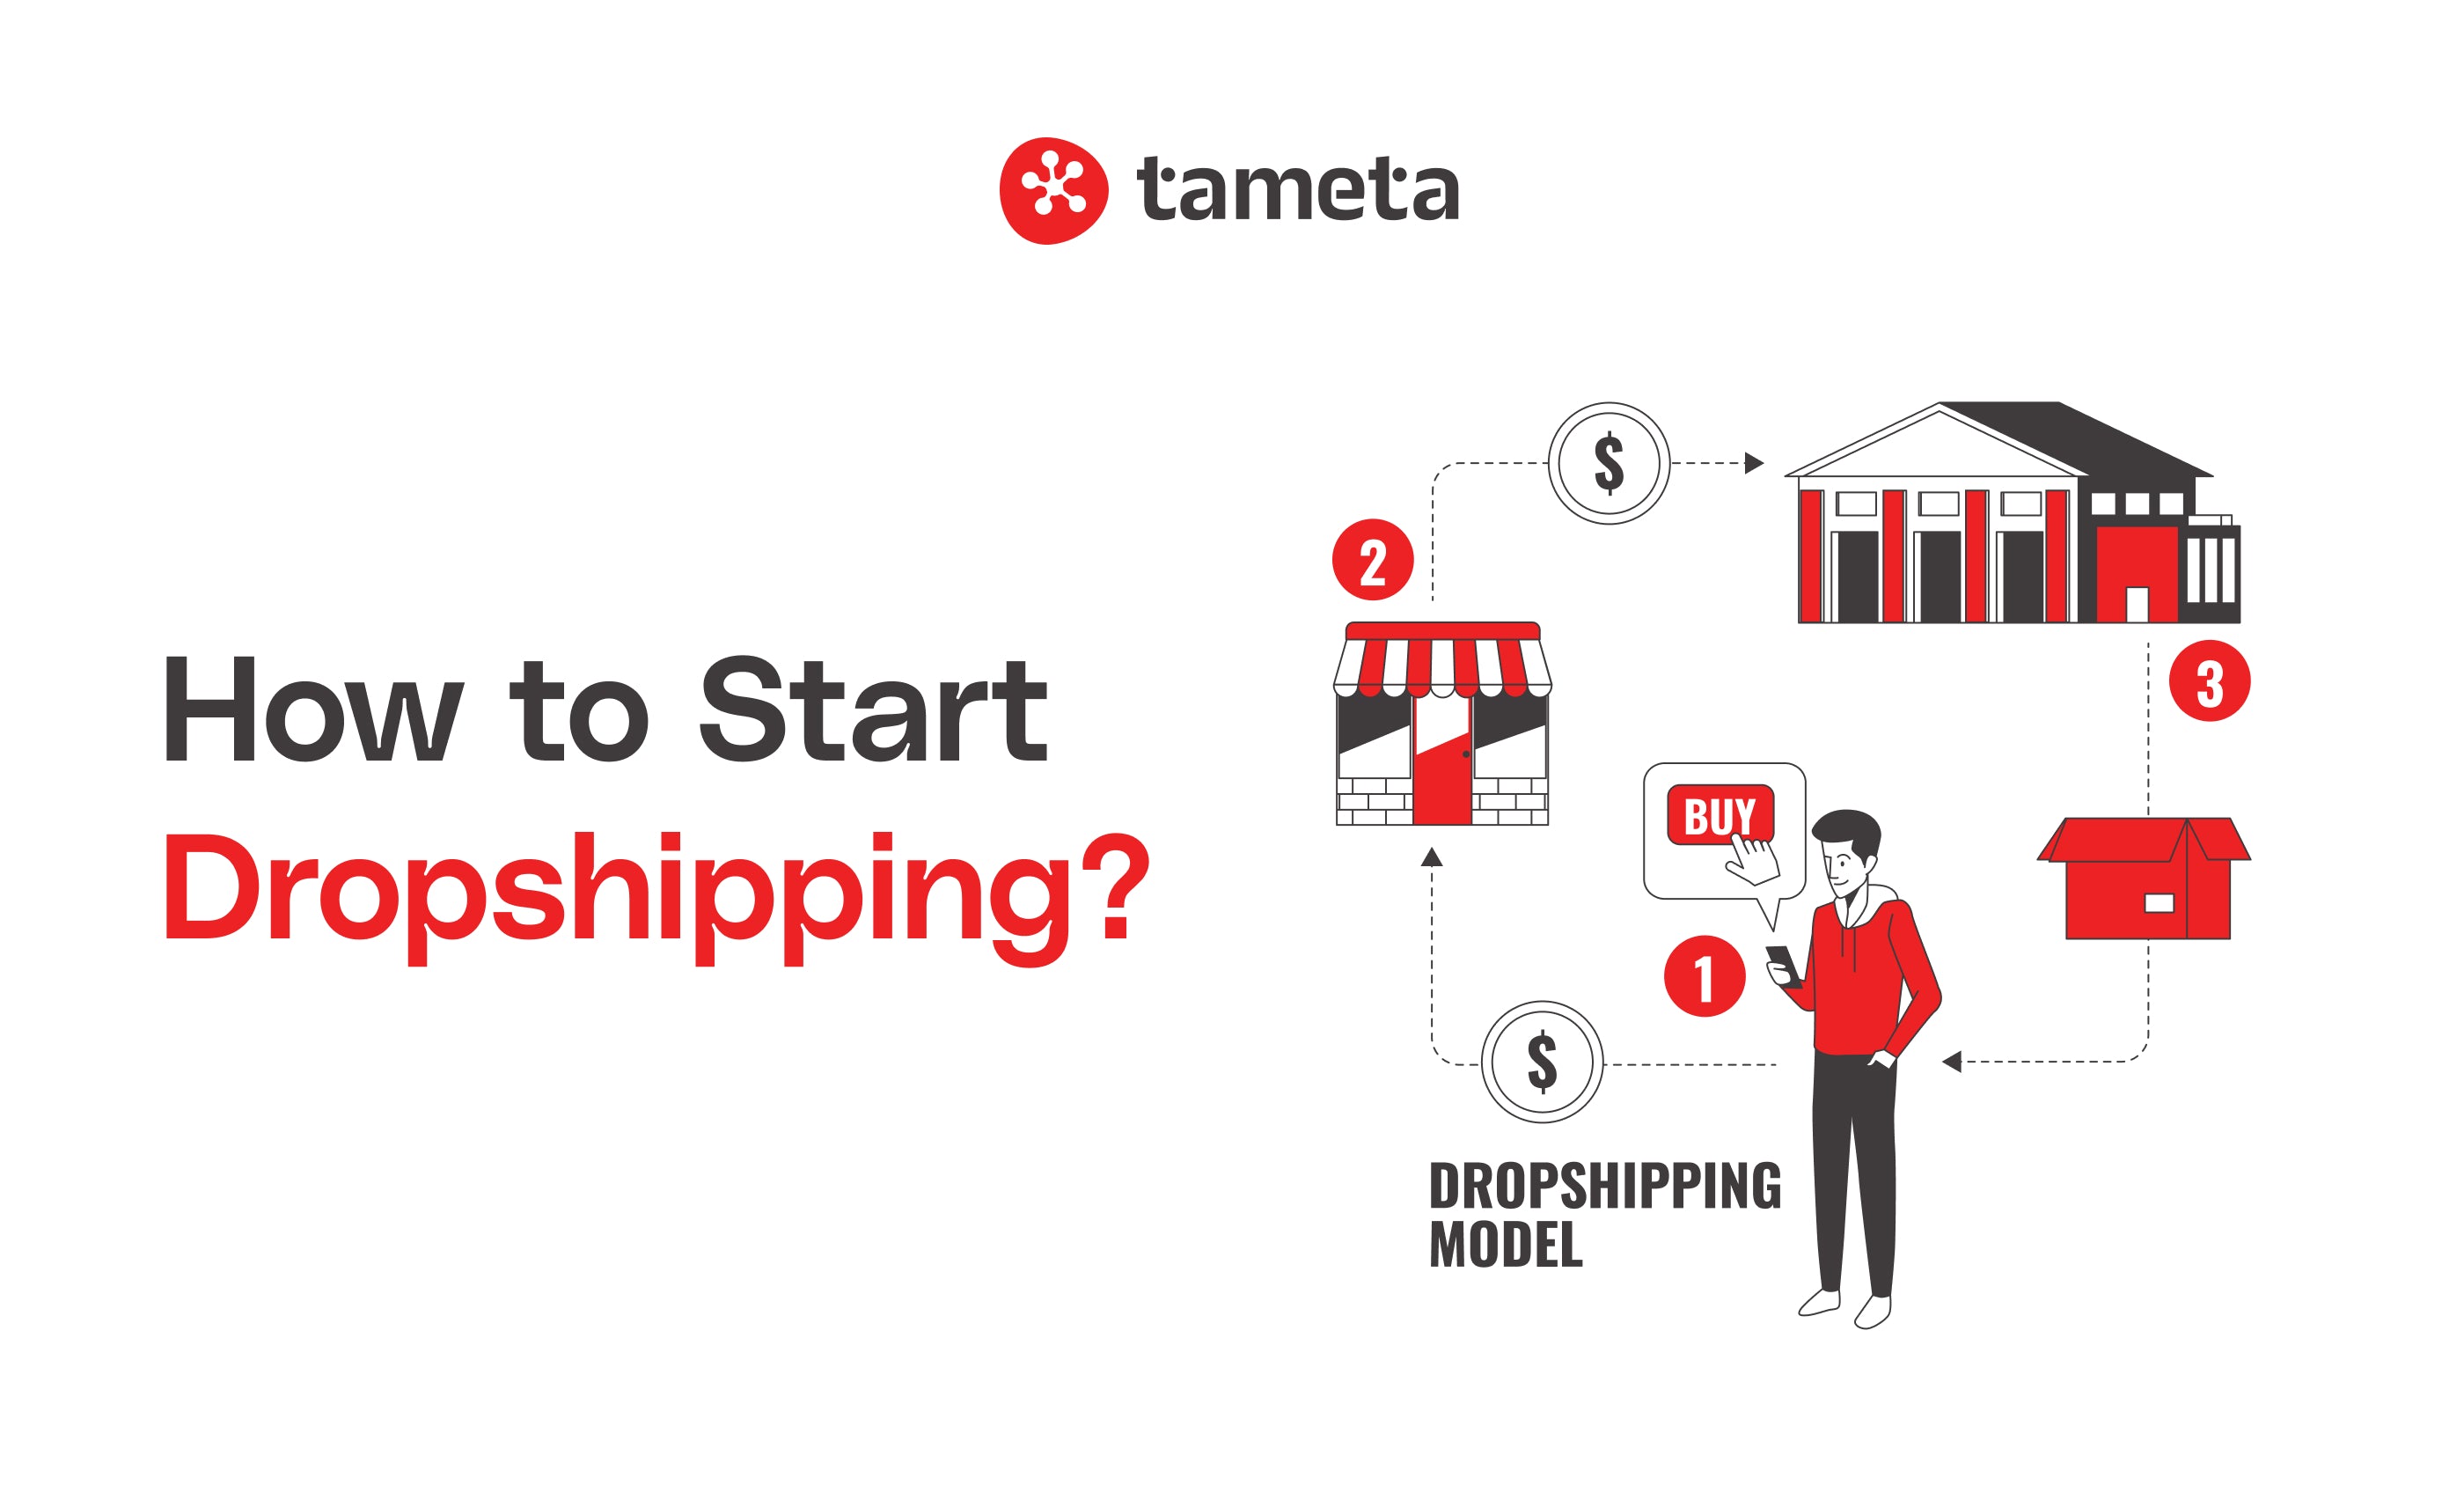 How to start Dropshipping? Deep detailed dropshipping